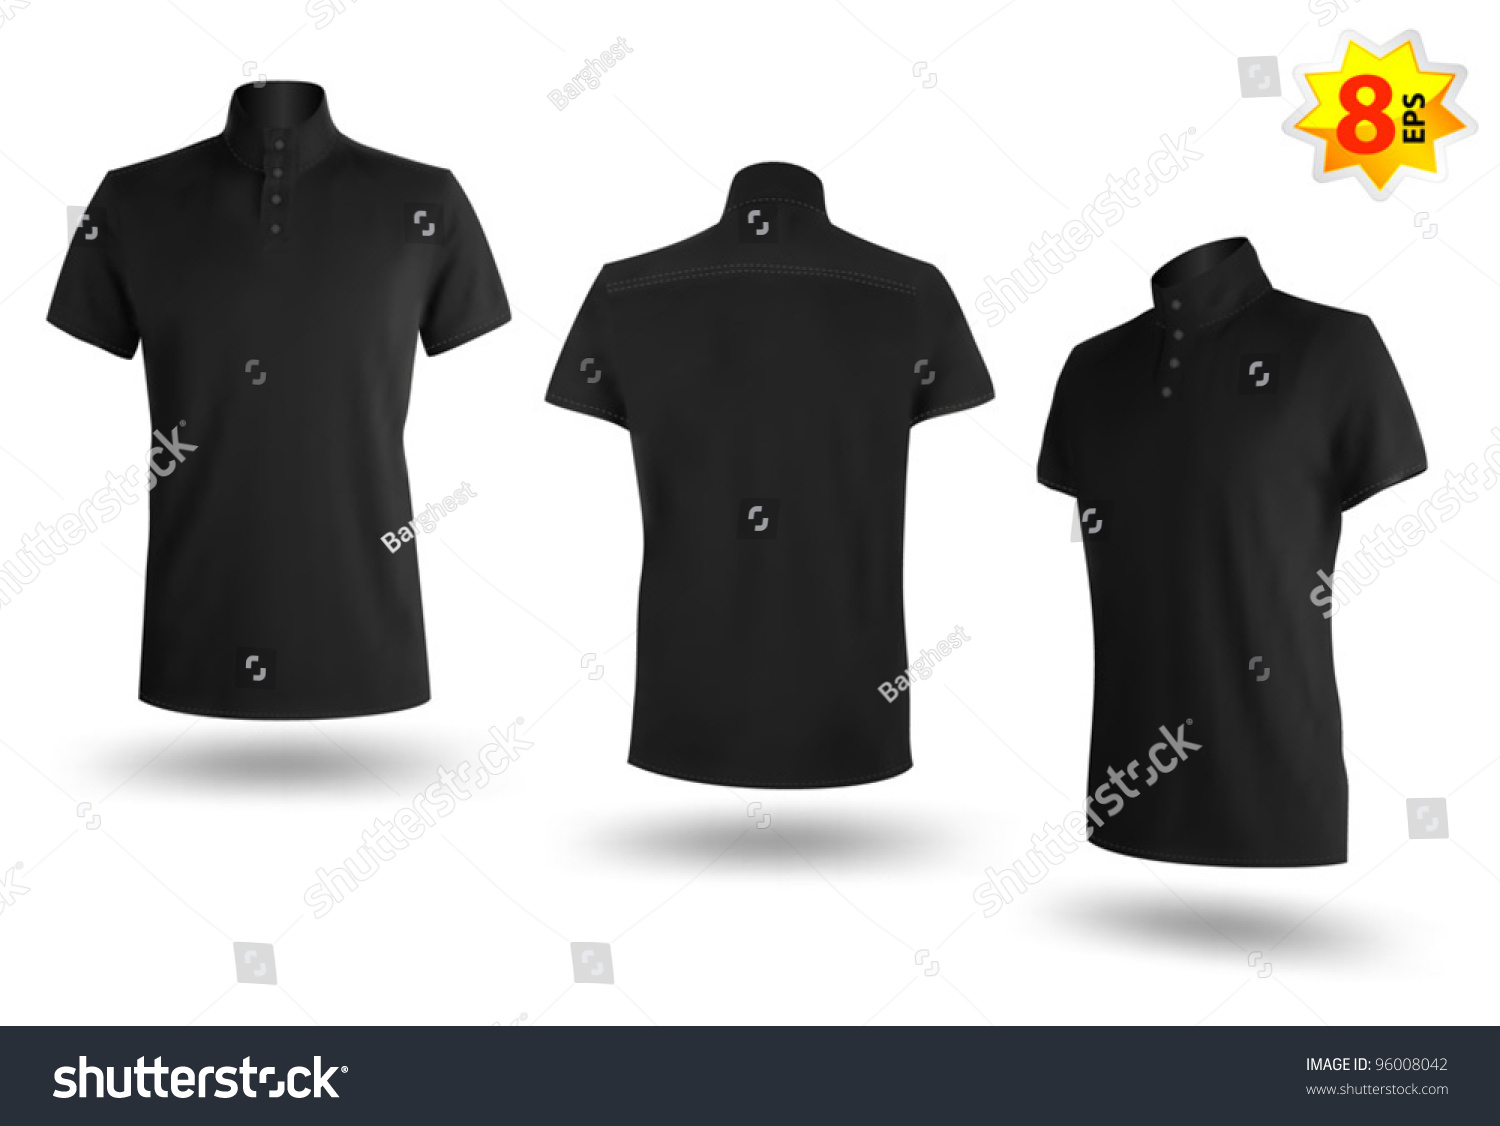 Set Of Black Polo Shirts Template For Men. Mesh And Gradients Only ...